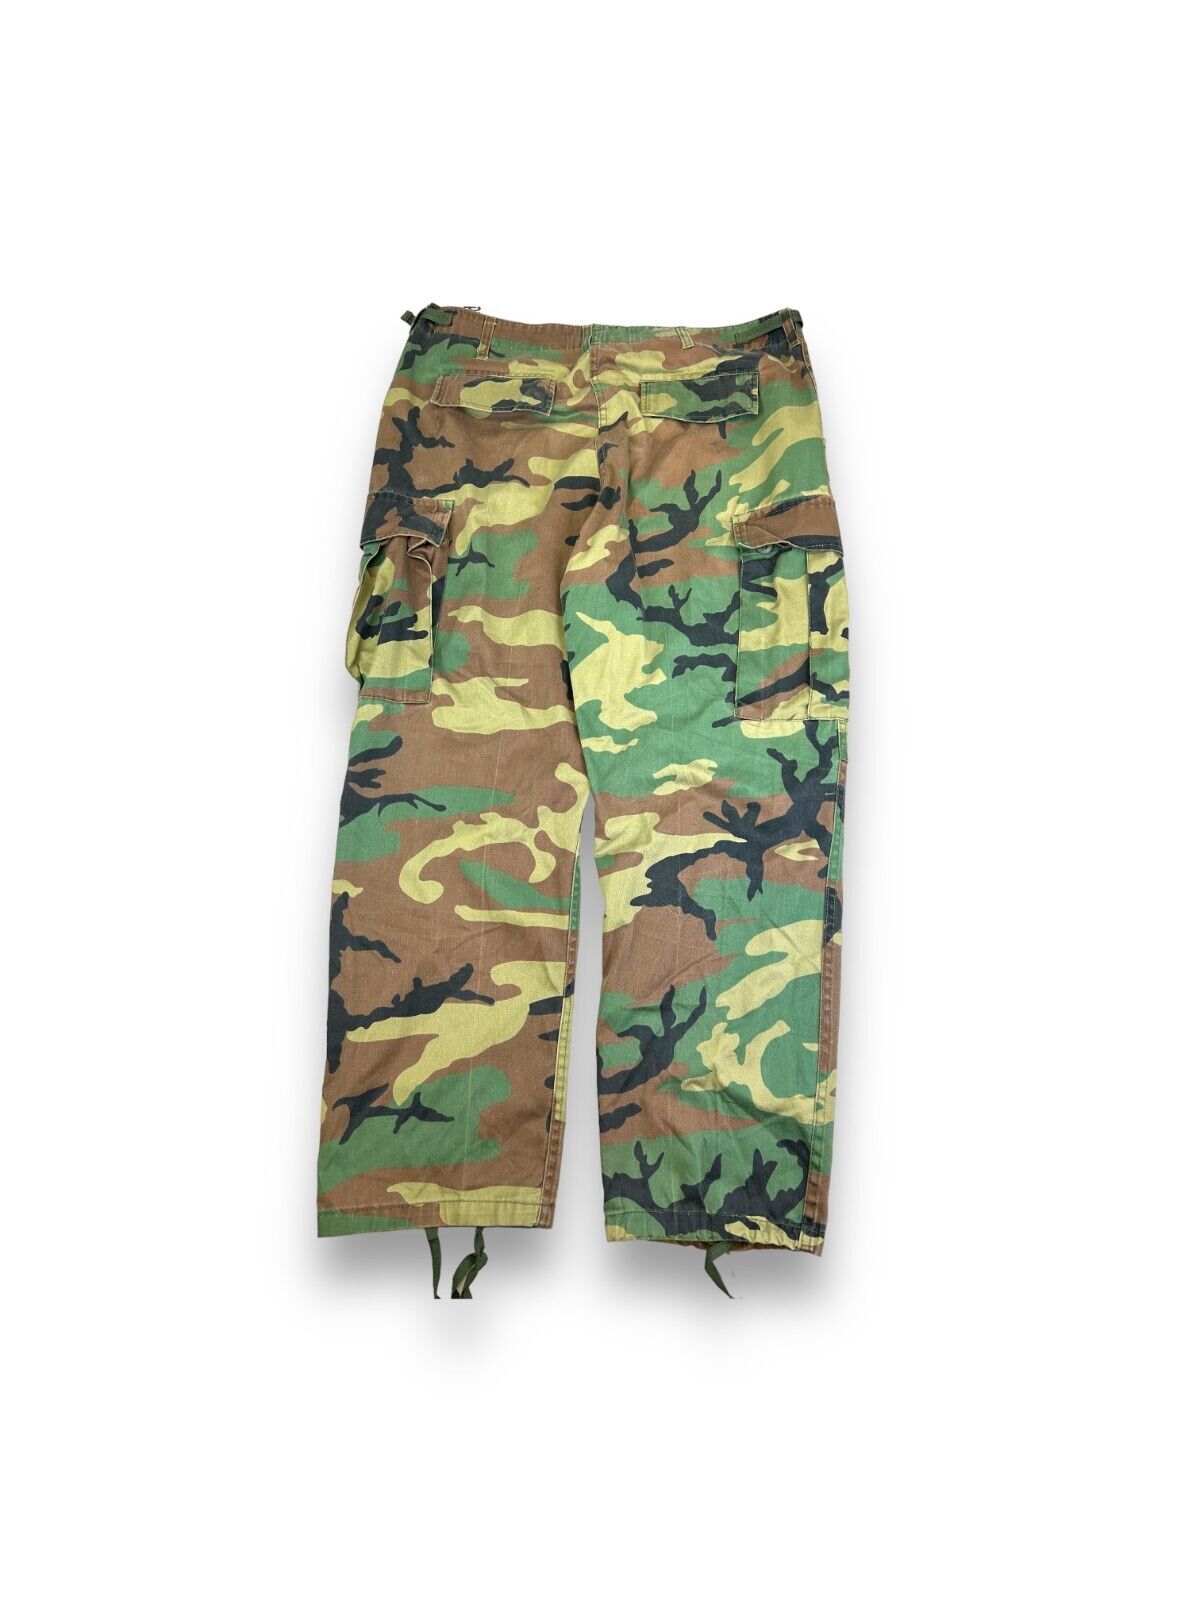 Vintage 90s Military Issue Woodland Camo Tactical Cargo Pants Size 38W